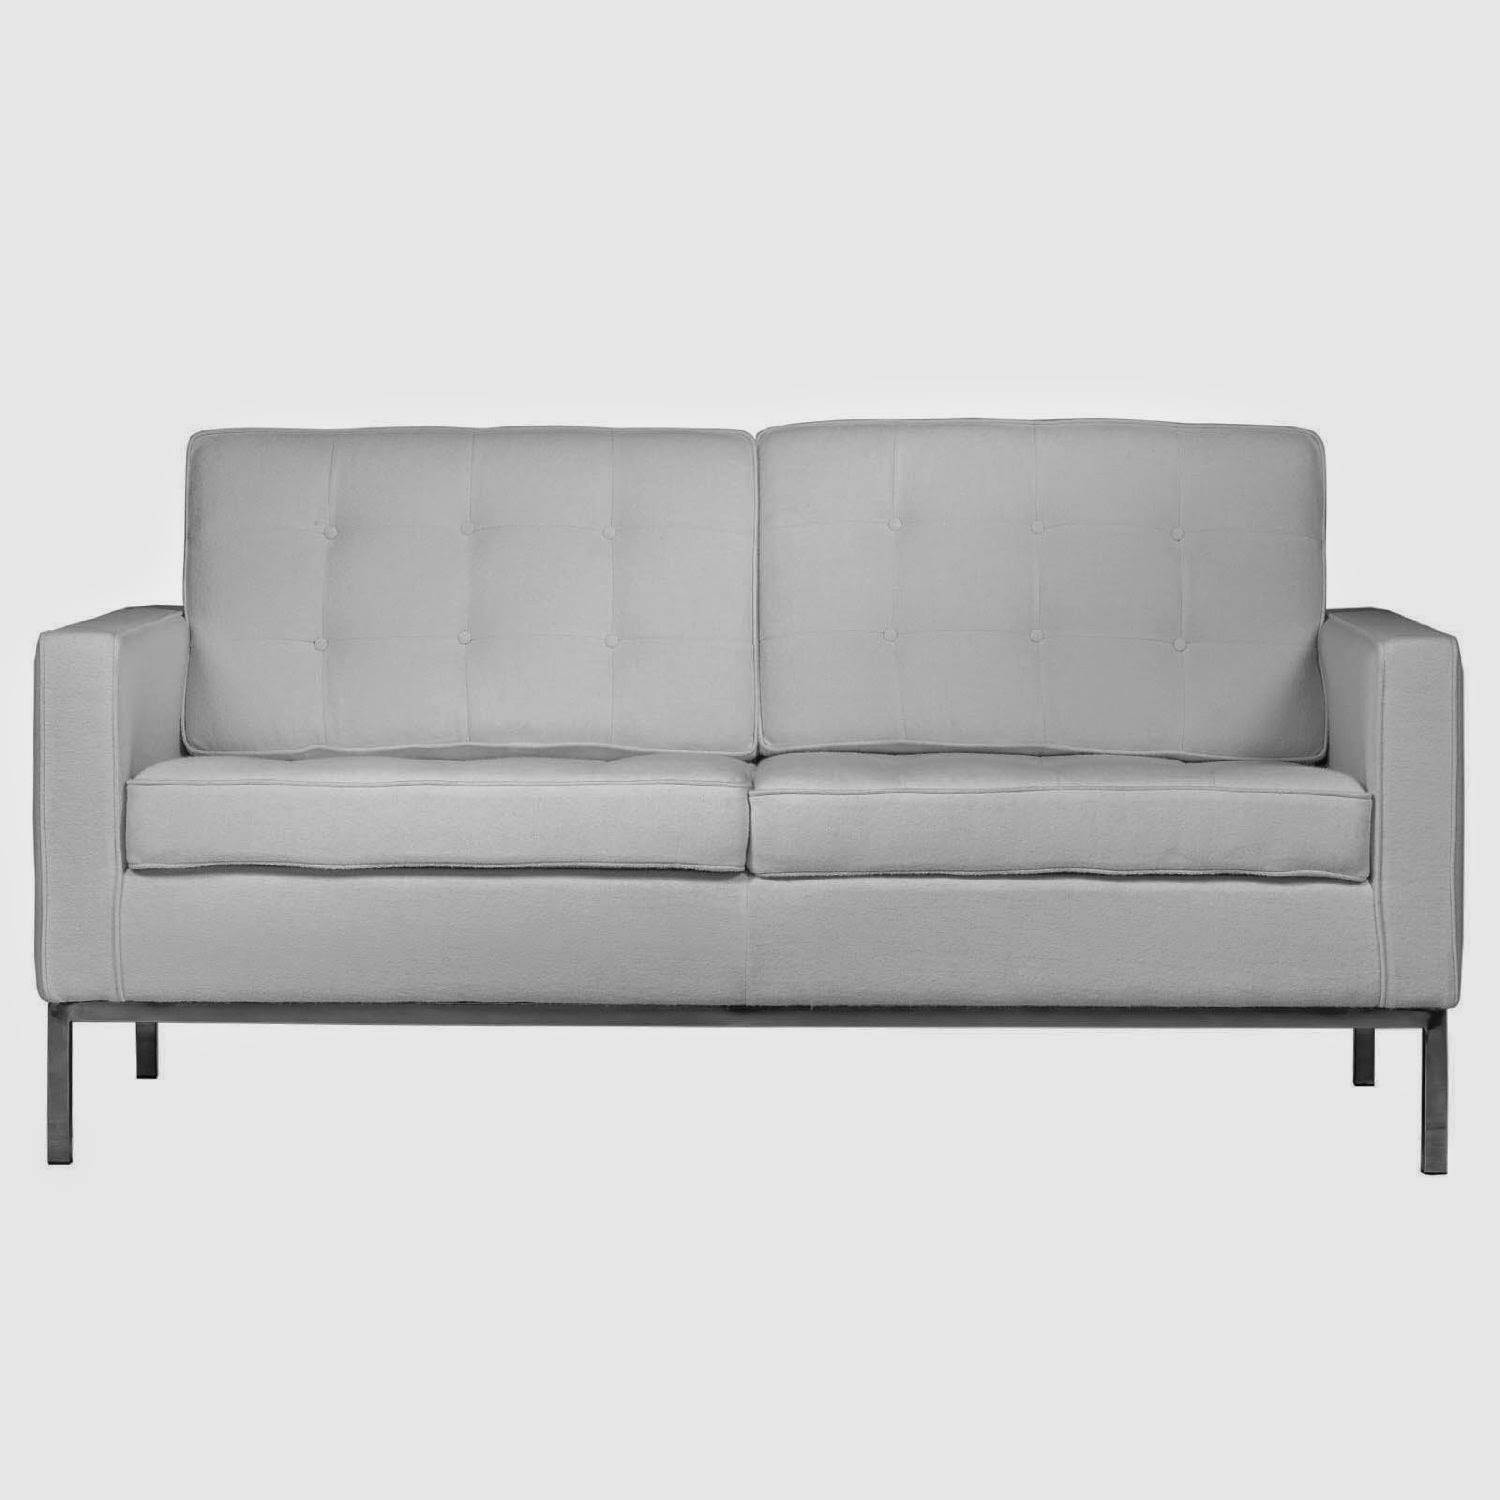 sleeper couch: small sleeper couch